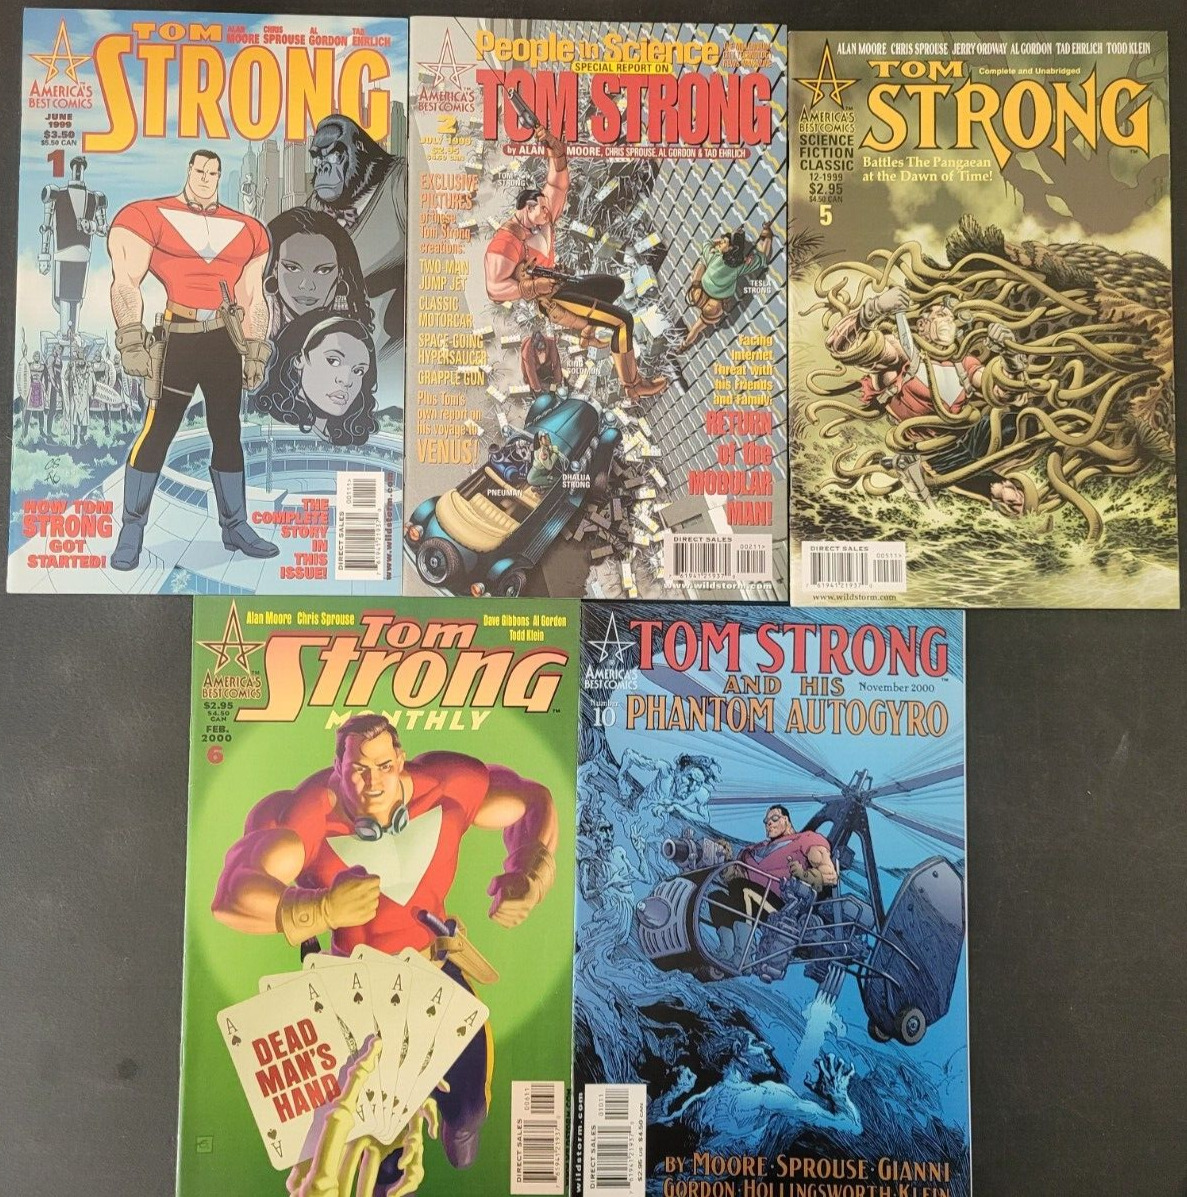 TOM STRONG SET OF 8 ISSUES (1999) ABC COMICS 1ST FULL APPEARANCE ALAN MOORE #1